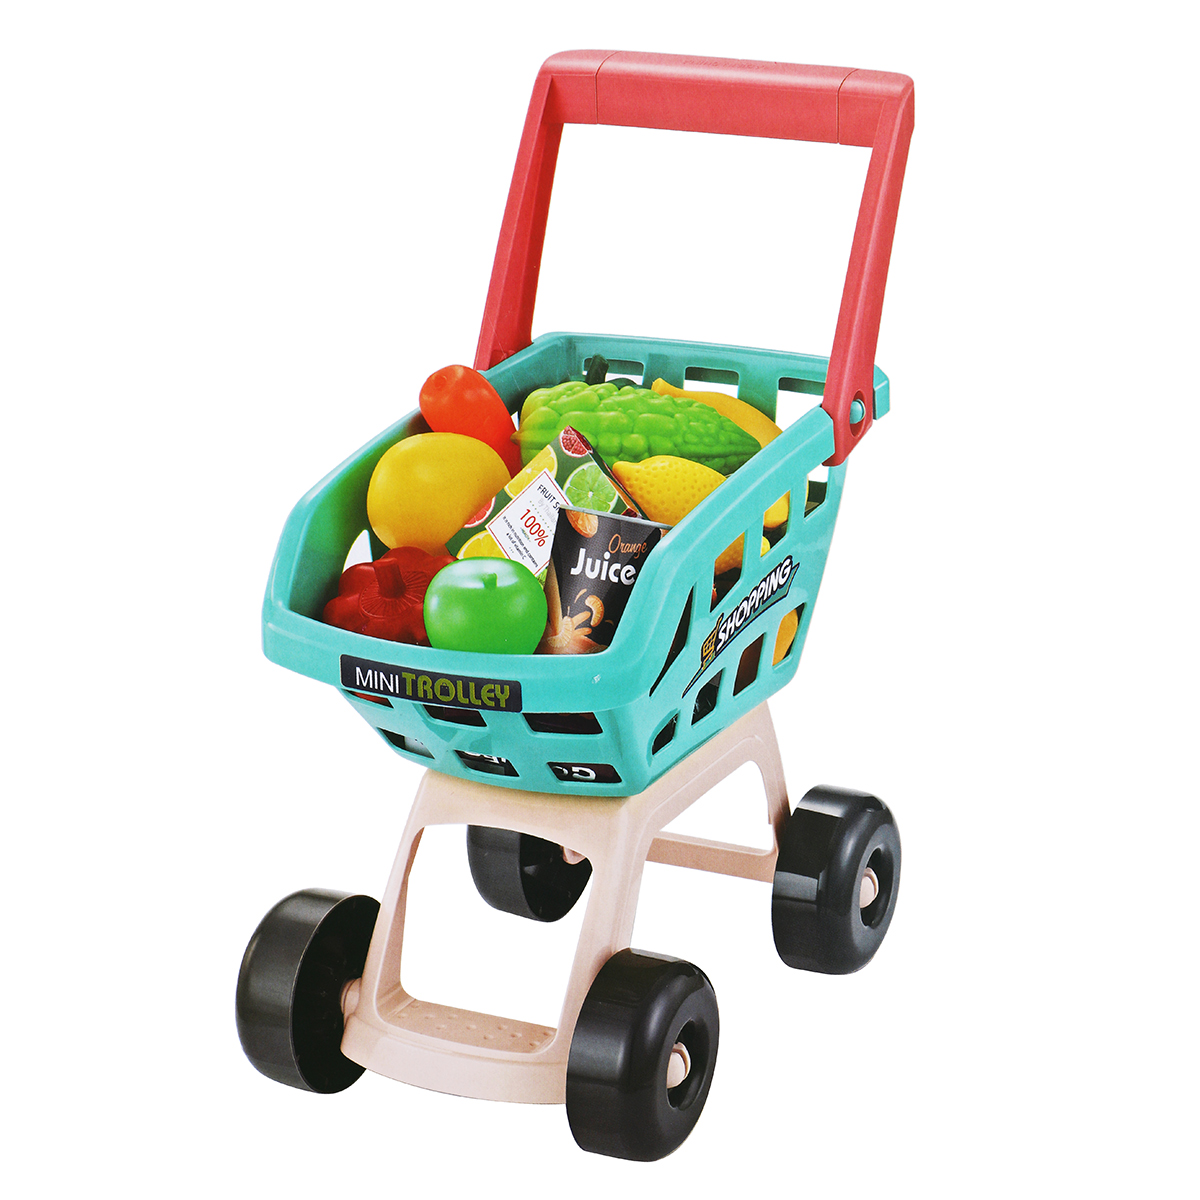 Children-Play-House-Kitchen-Simulation-Toys-Scanner-Credit-Card-Machine-Trolley-Shopping-Trolley-Cas-1635566-4